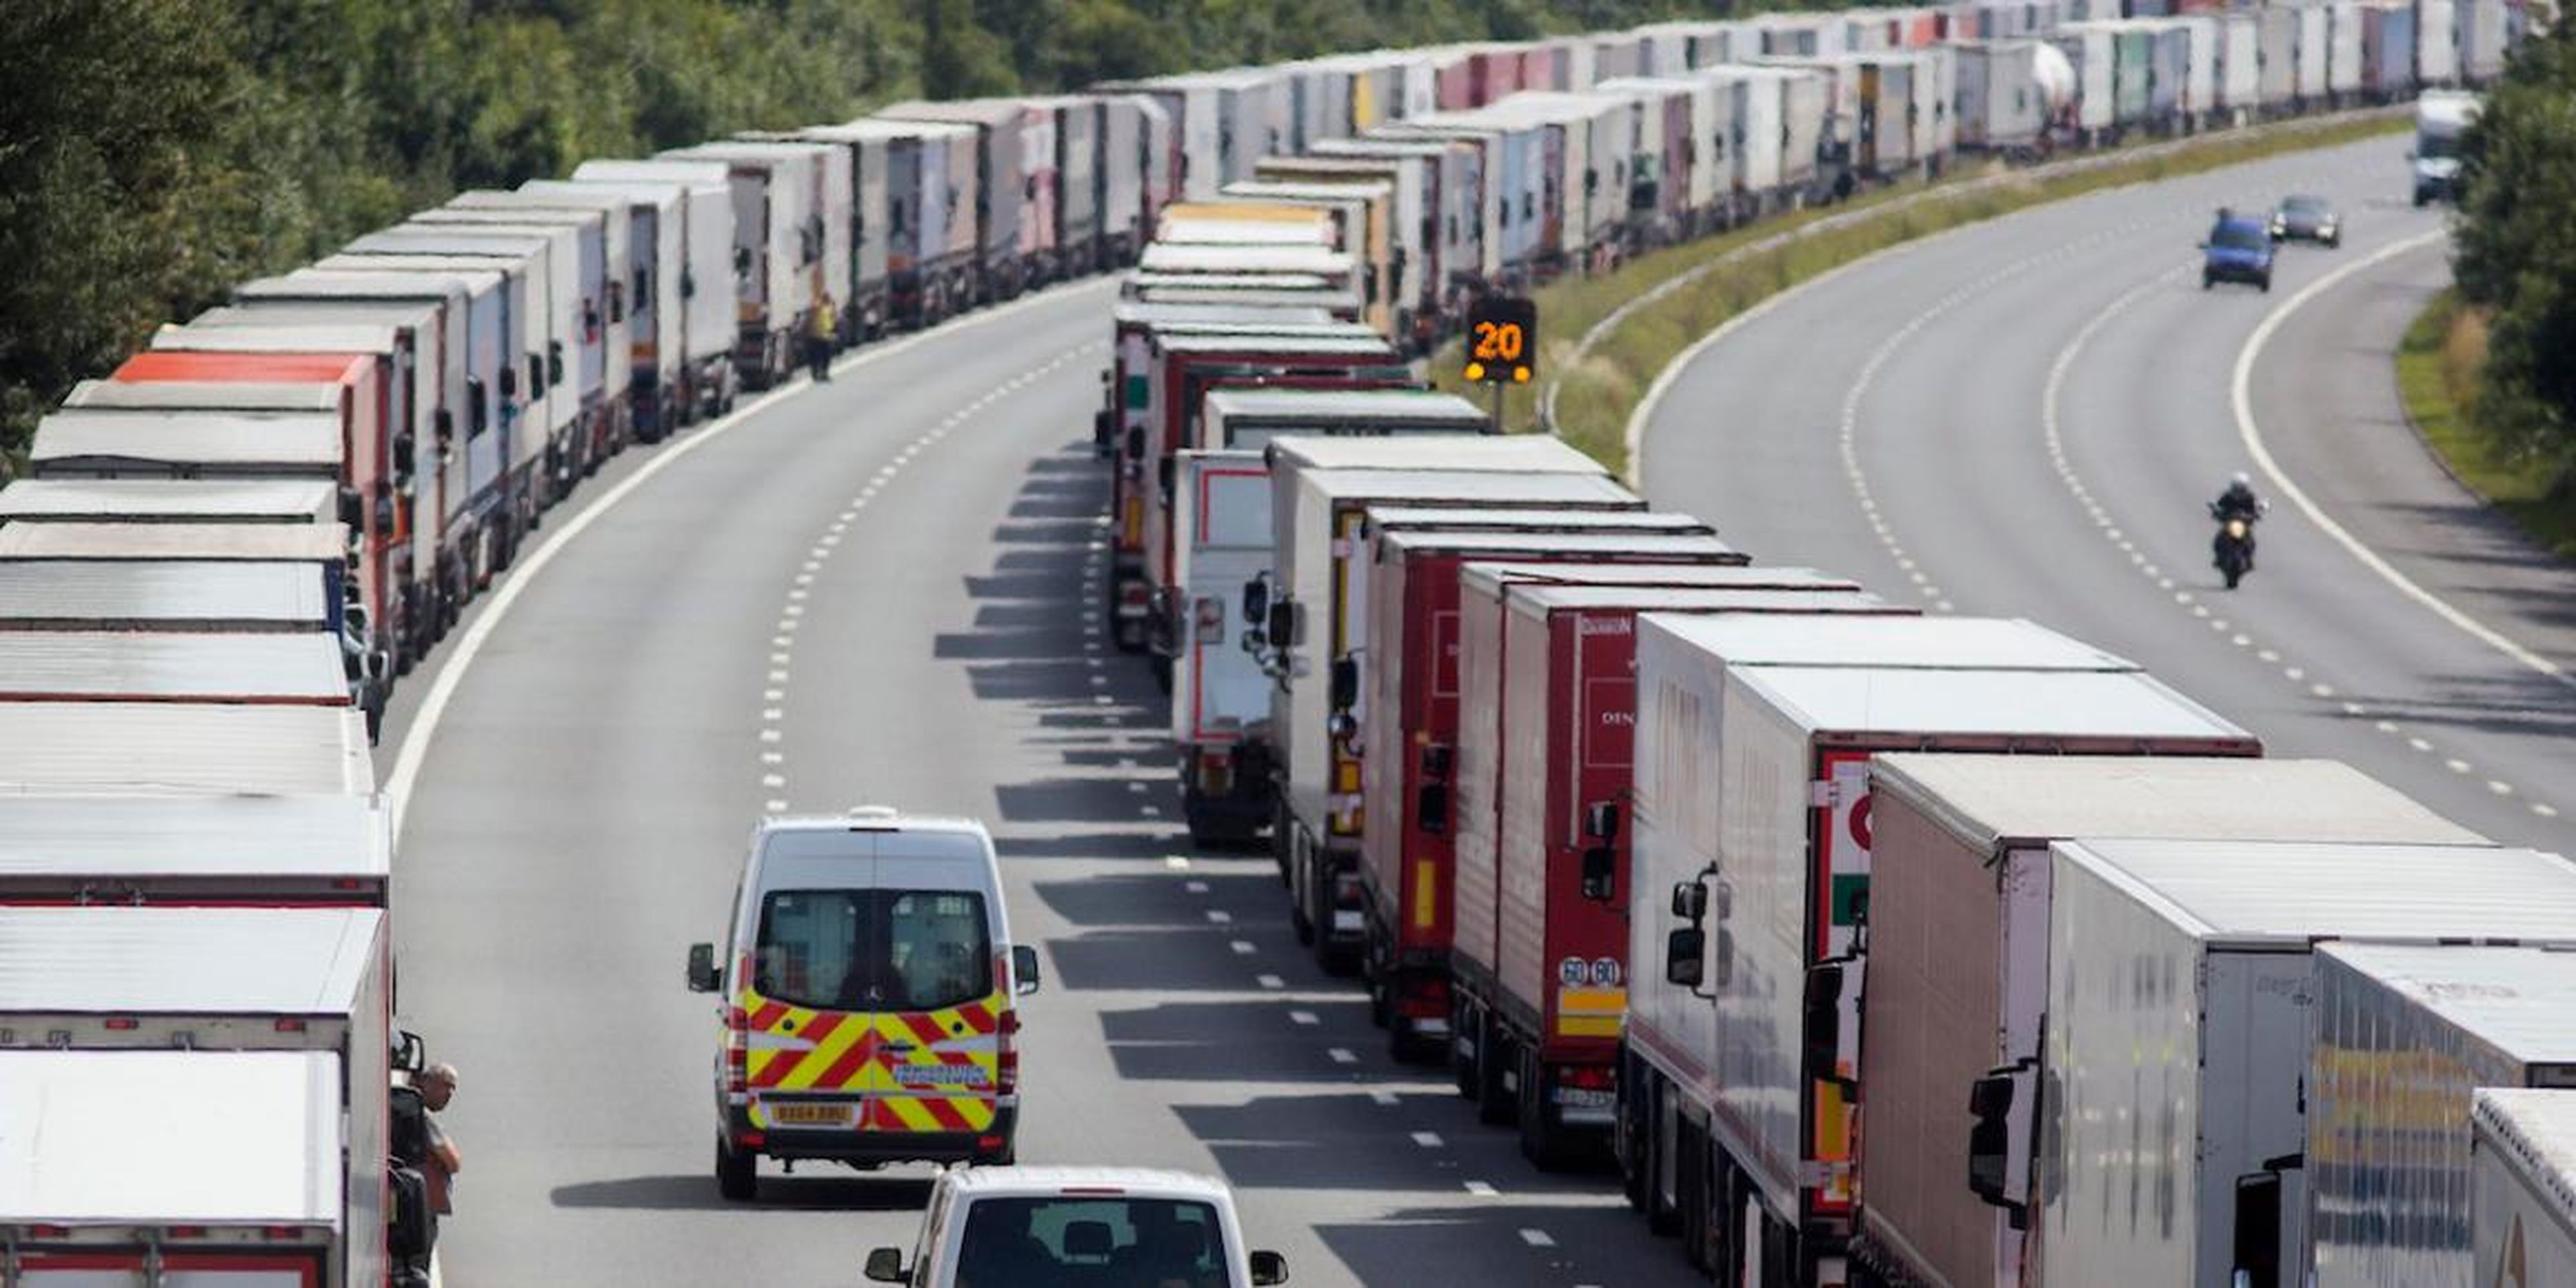 Immigration vehicles pass parked lorries on the M20 motorway, which leads from London to the Channel Tunnel terminal at Ashford and the Ferry Terminal at Dover, in southern England, Britain July 31, 2015.